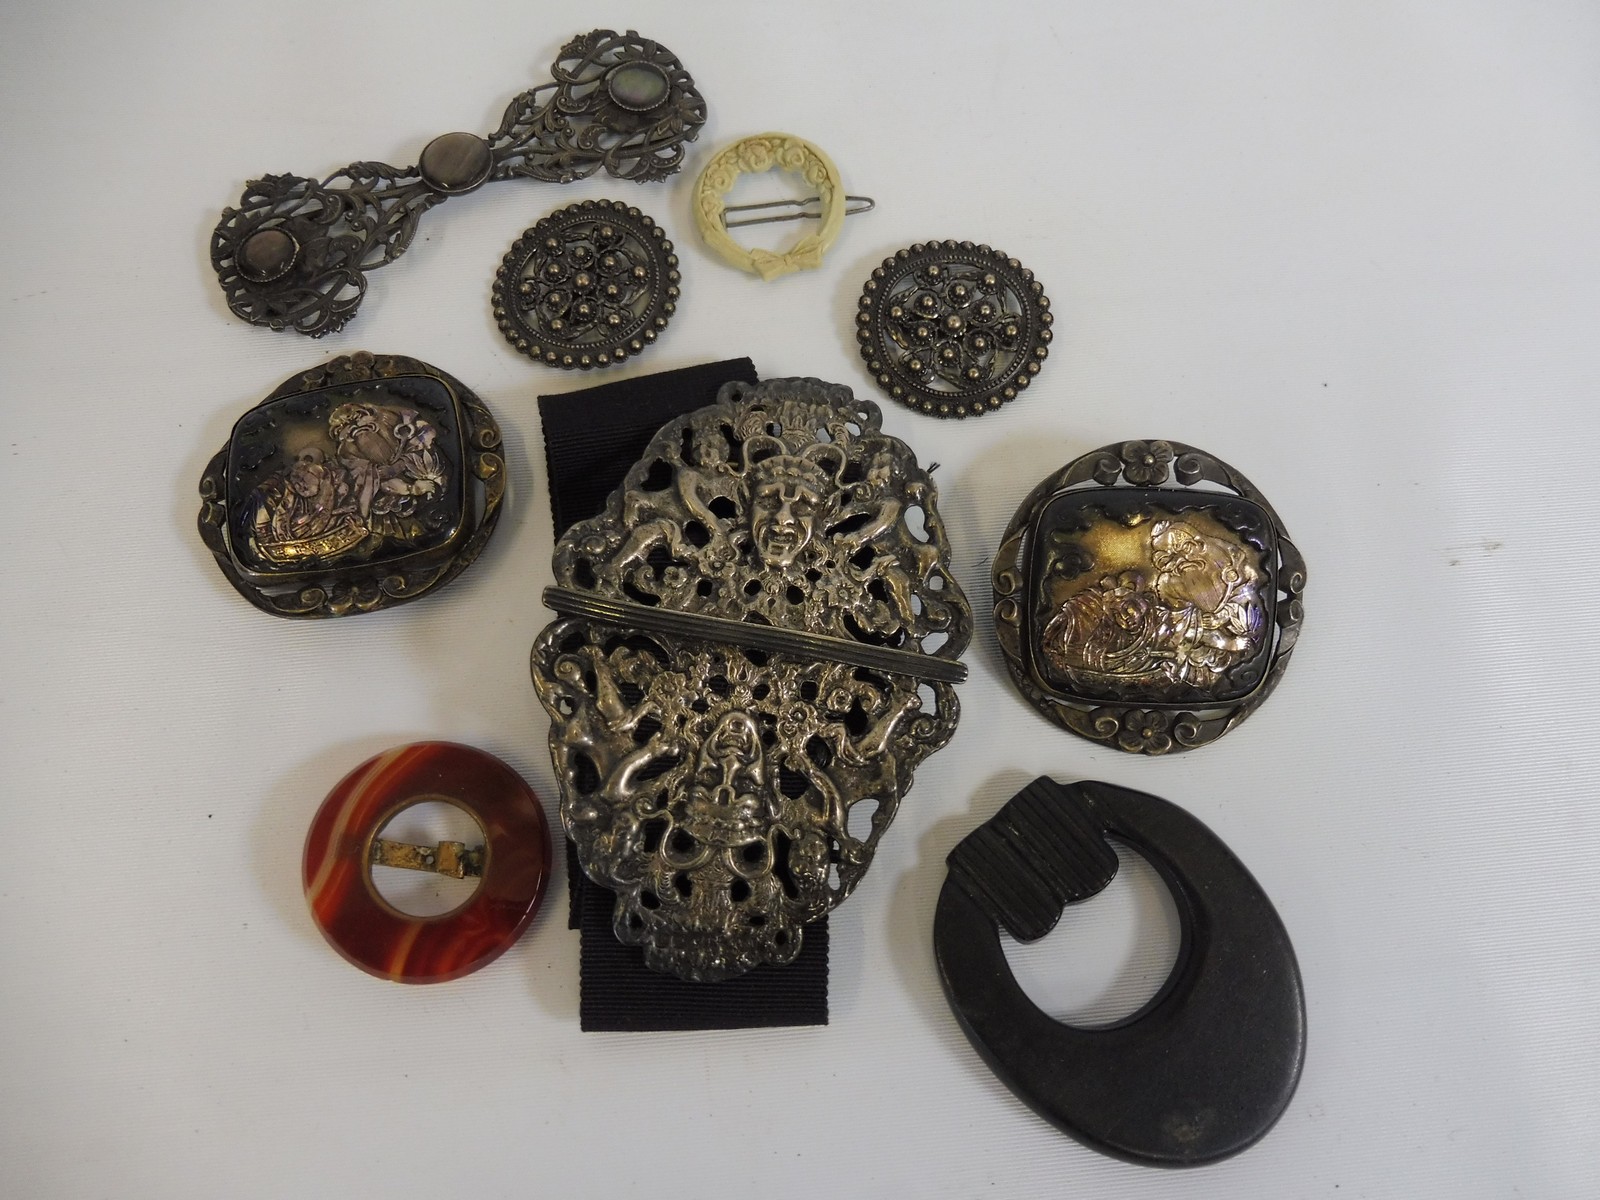 A selection of unusual buckles and brooches including a pierced silver two piece nurse's buckle.